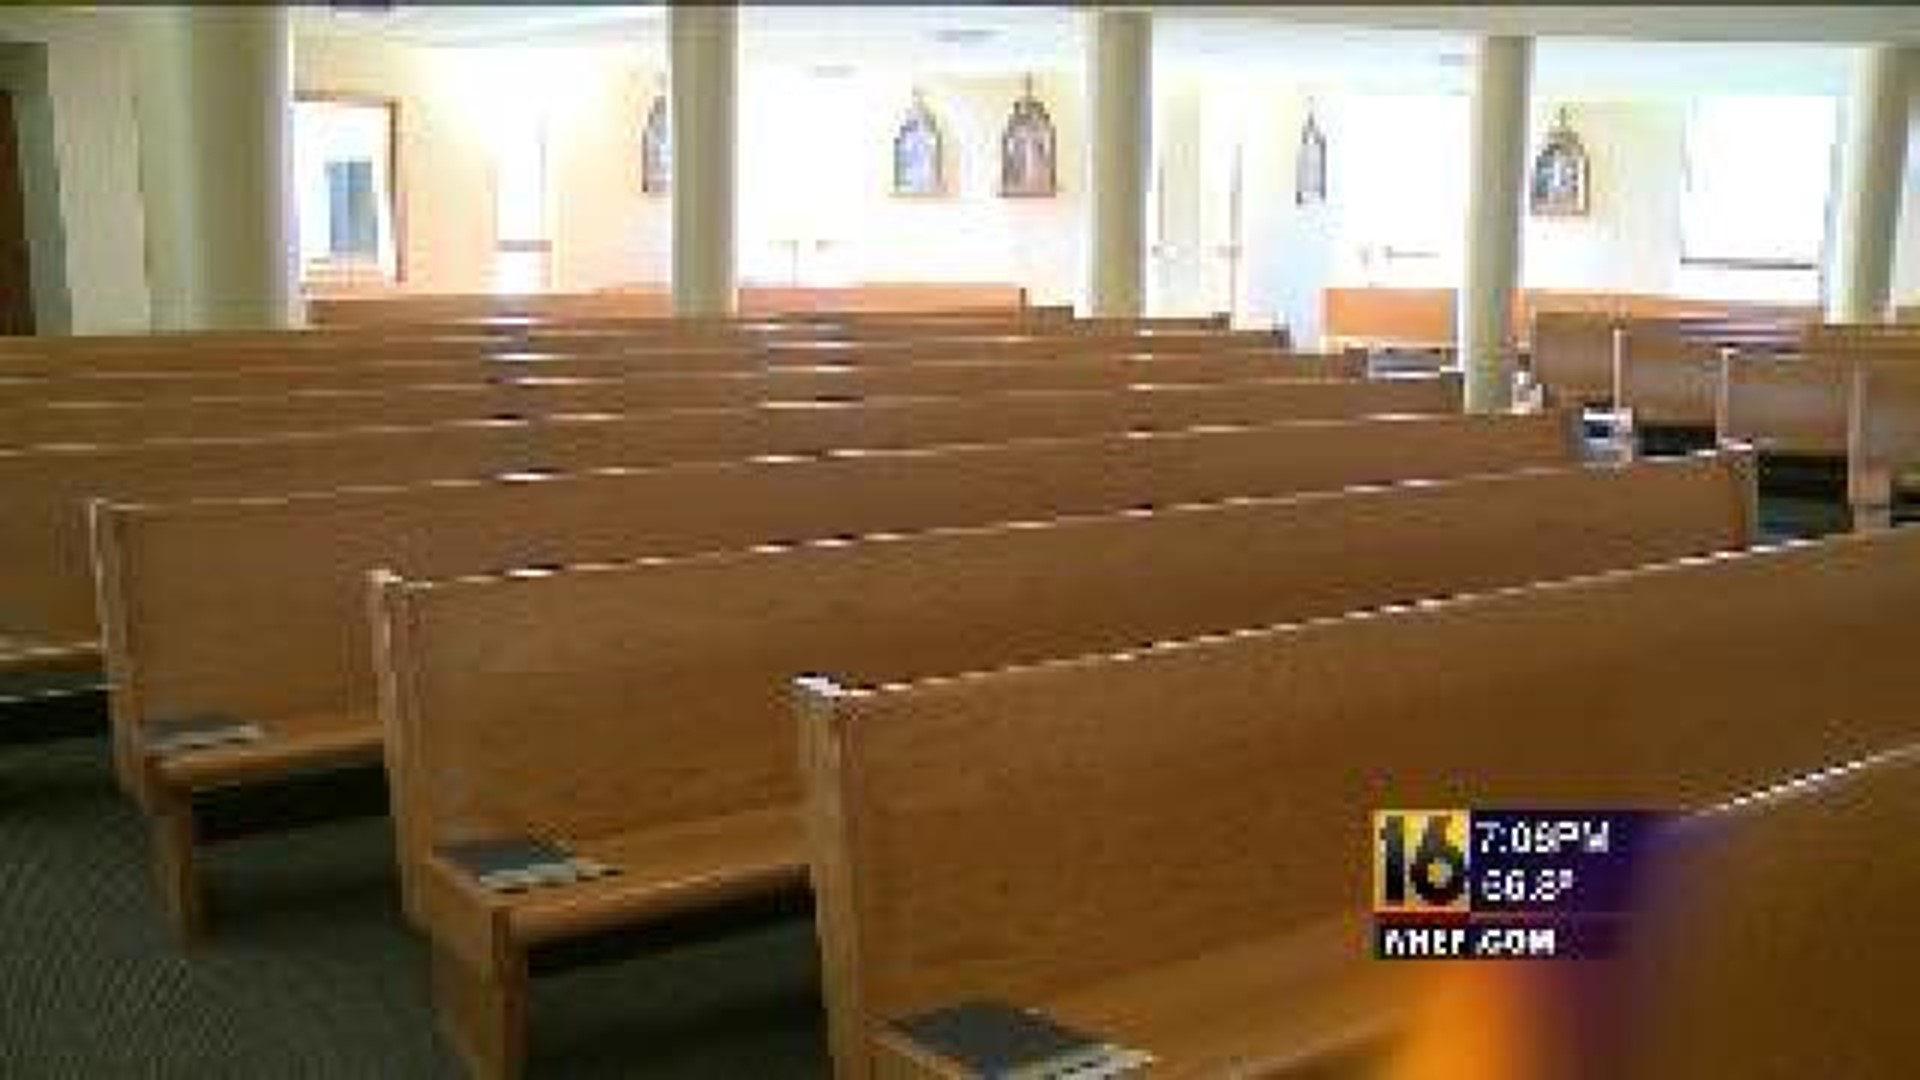 Some Churches Introduce Electronic Offerings